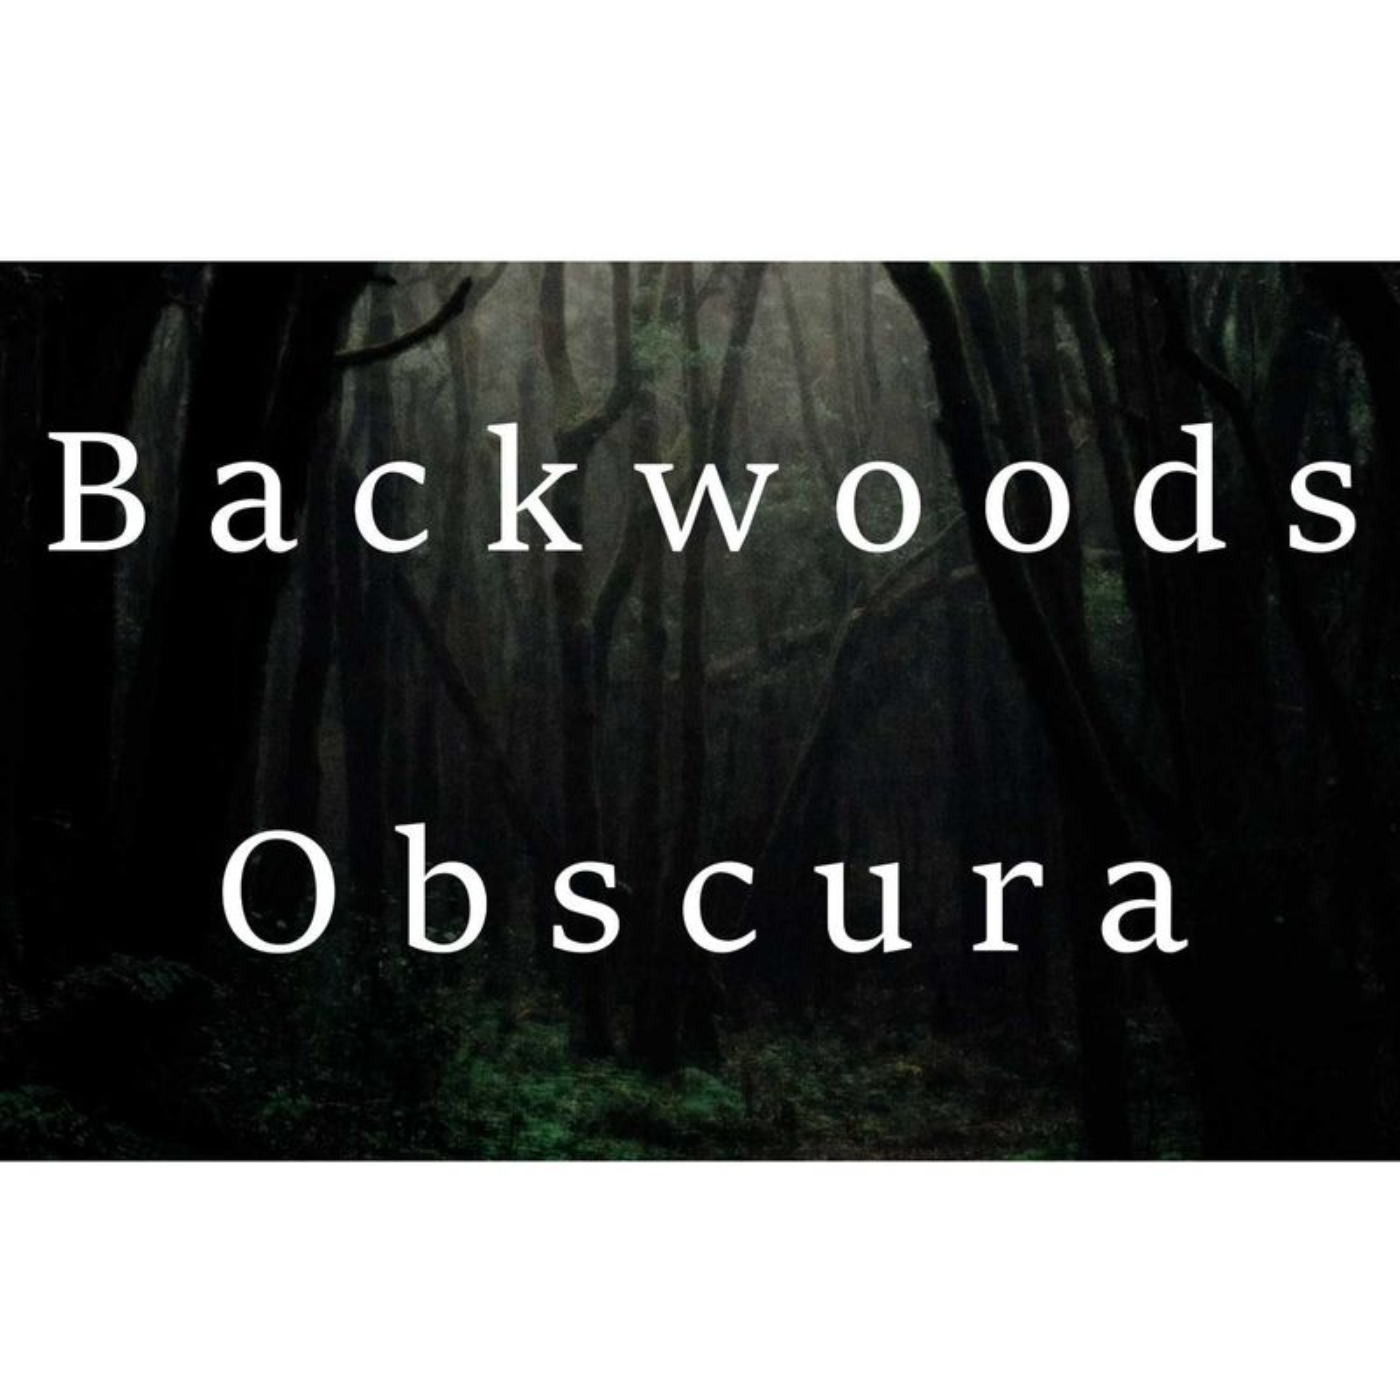 0115 - The Axeman (Of the United States) - Backwoods Obscura